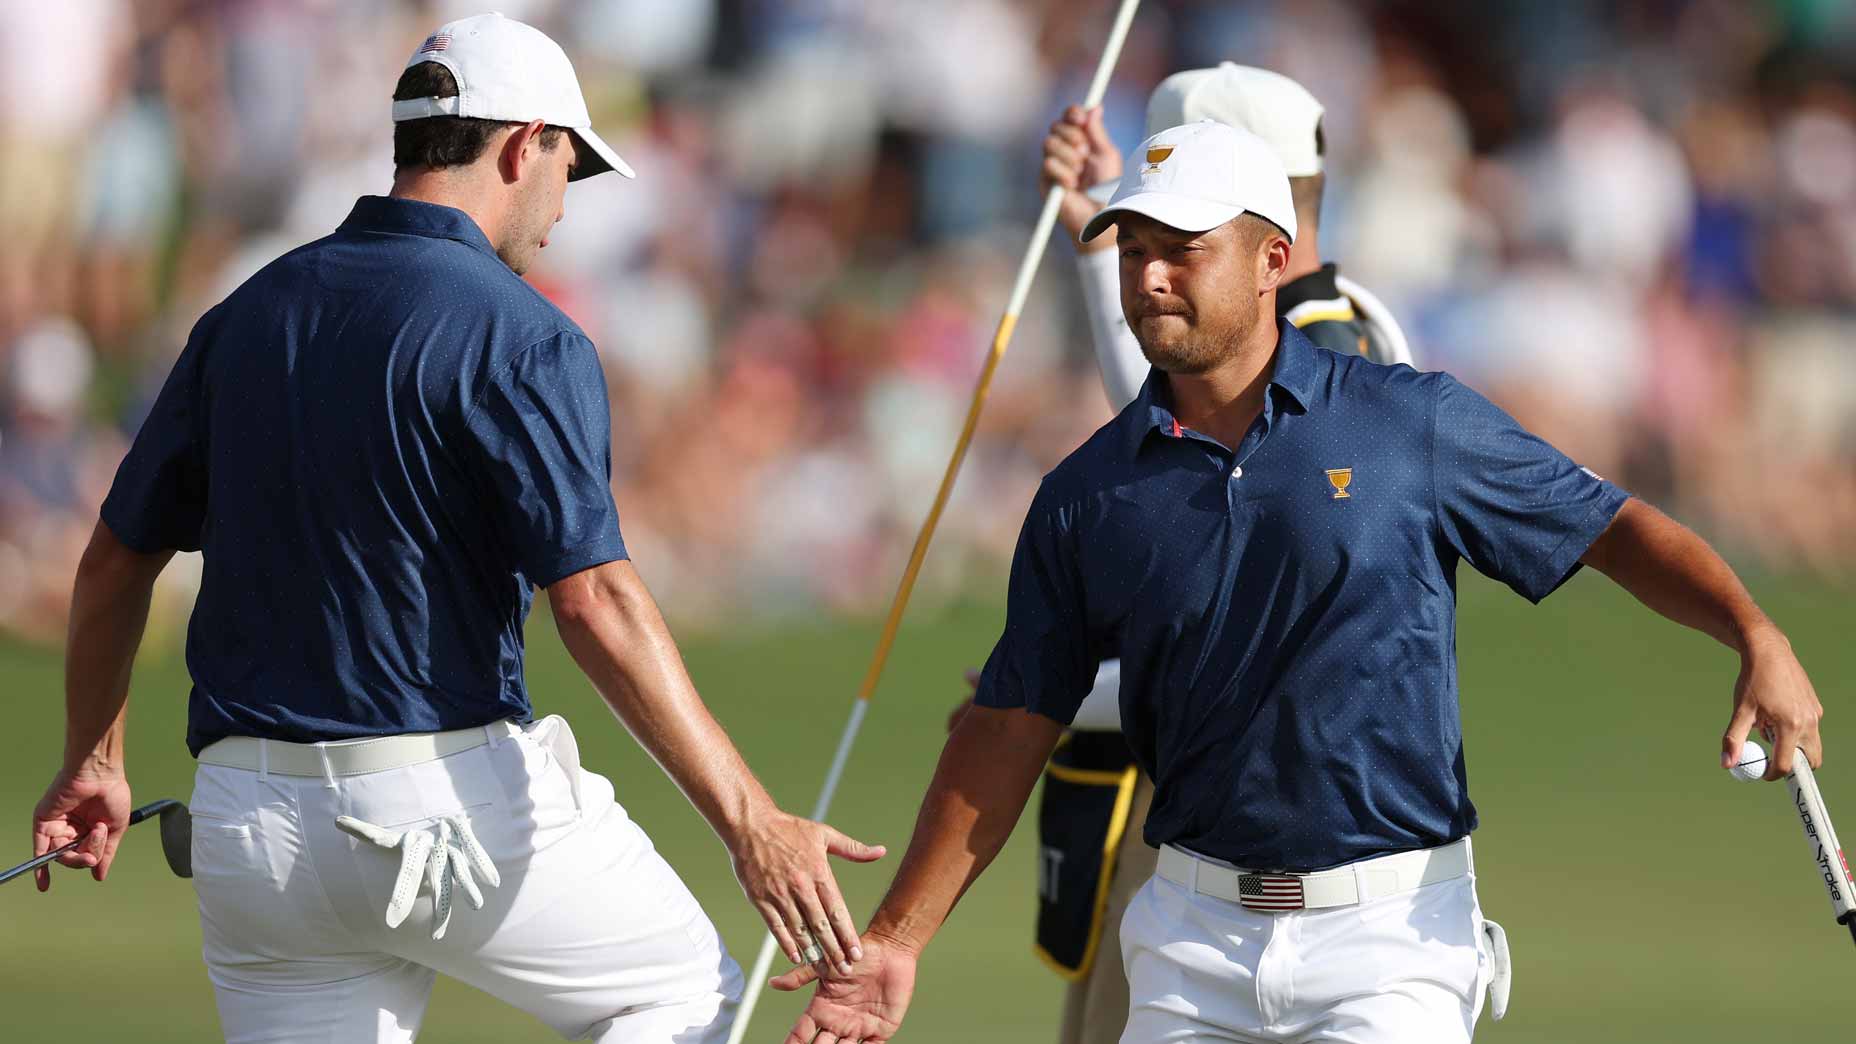 Xander Schauffele (R) of the United States Team celebrates making his putt on the 15th green with teammate Patrick Cantlay (L) during Saturday afternoon four-ball matches on day three of the 2022 Presidents Cup at Quail Hollow Country Club on September 24, 2022 in Charlotte, North Carolina.